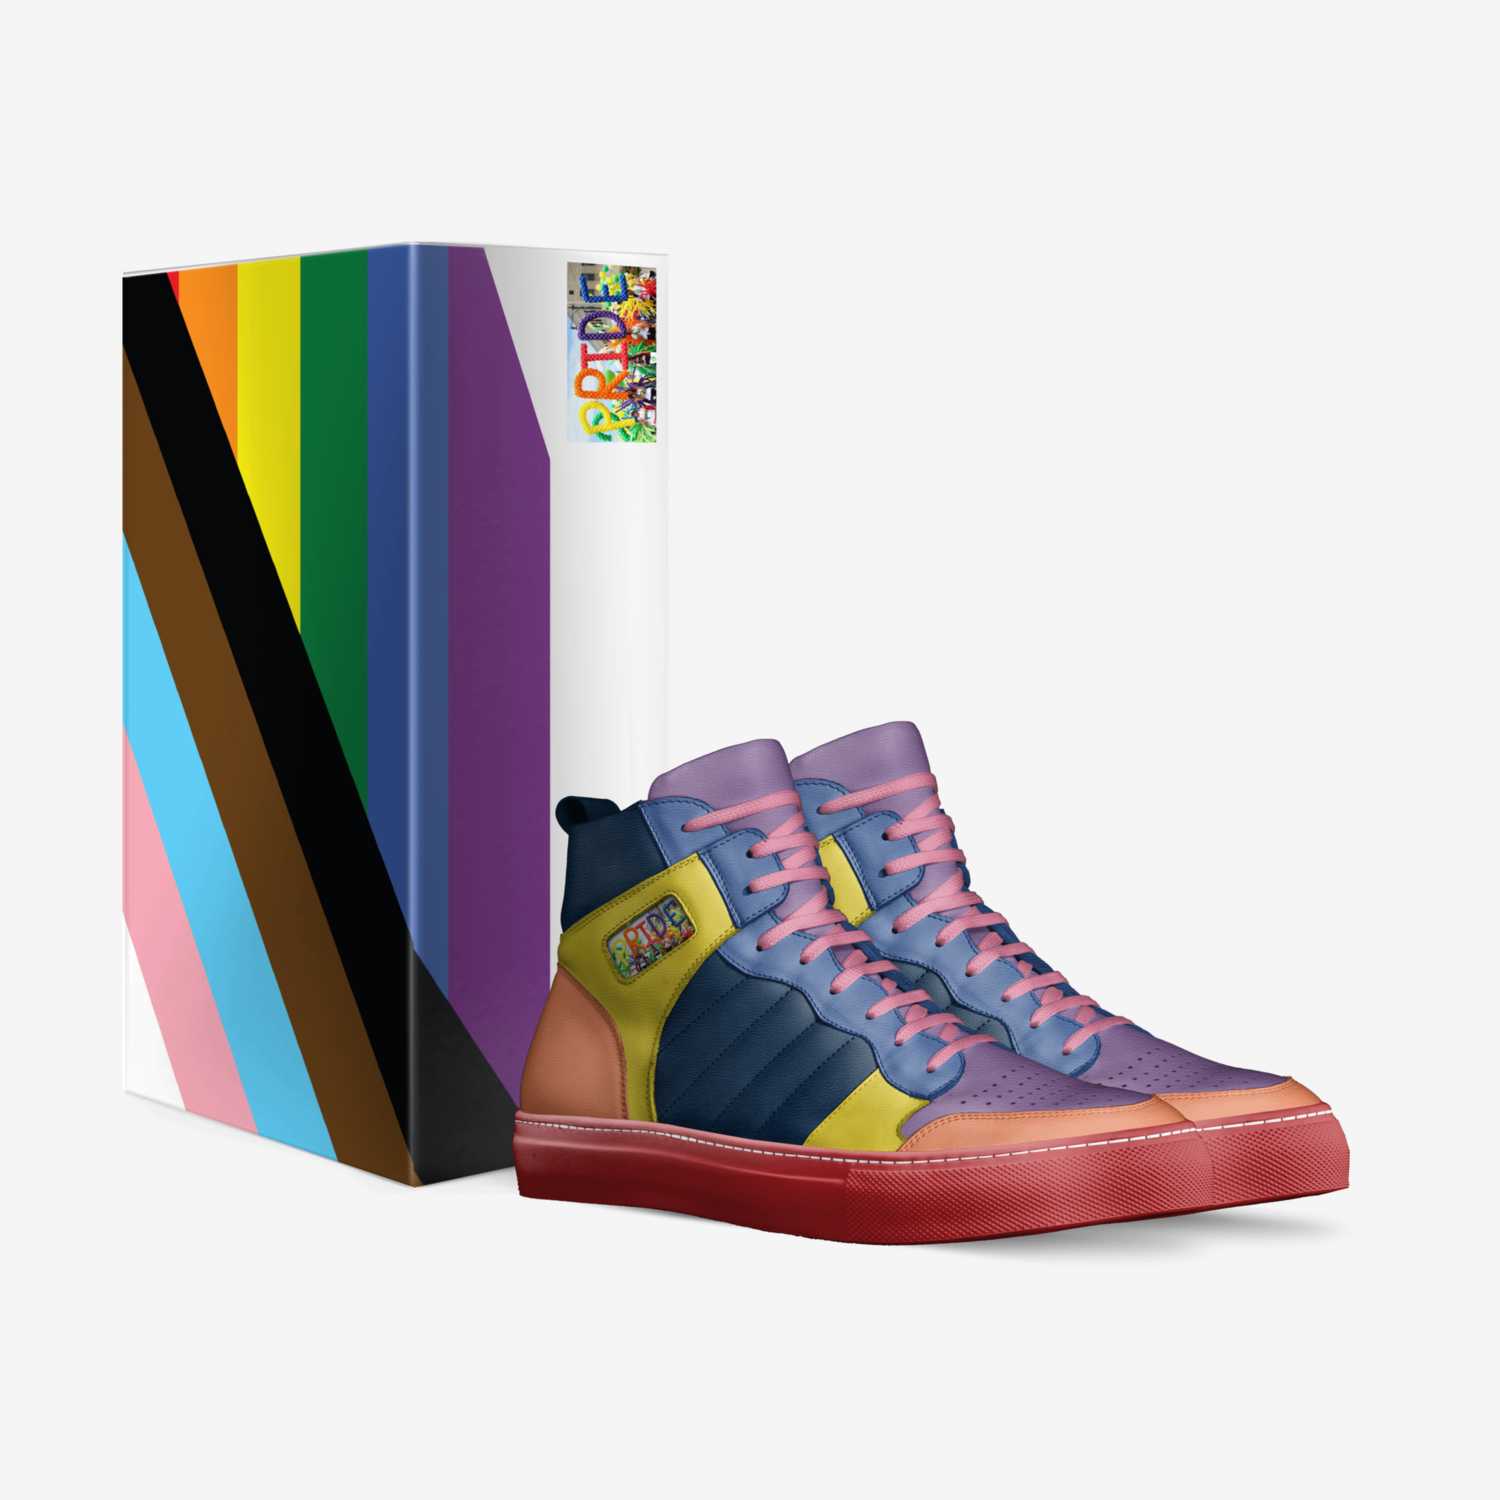 Pride W/ A Twist custom made in Italy shoes by Maneesh Chatman | Box view